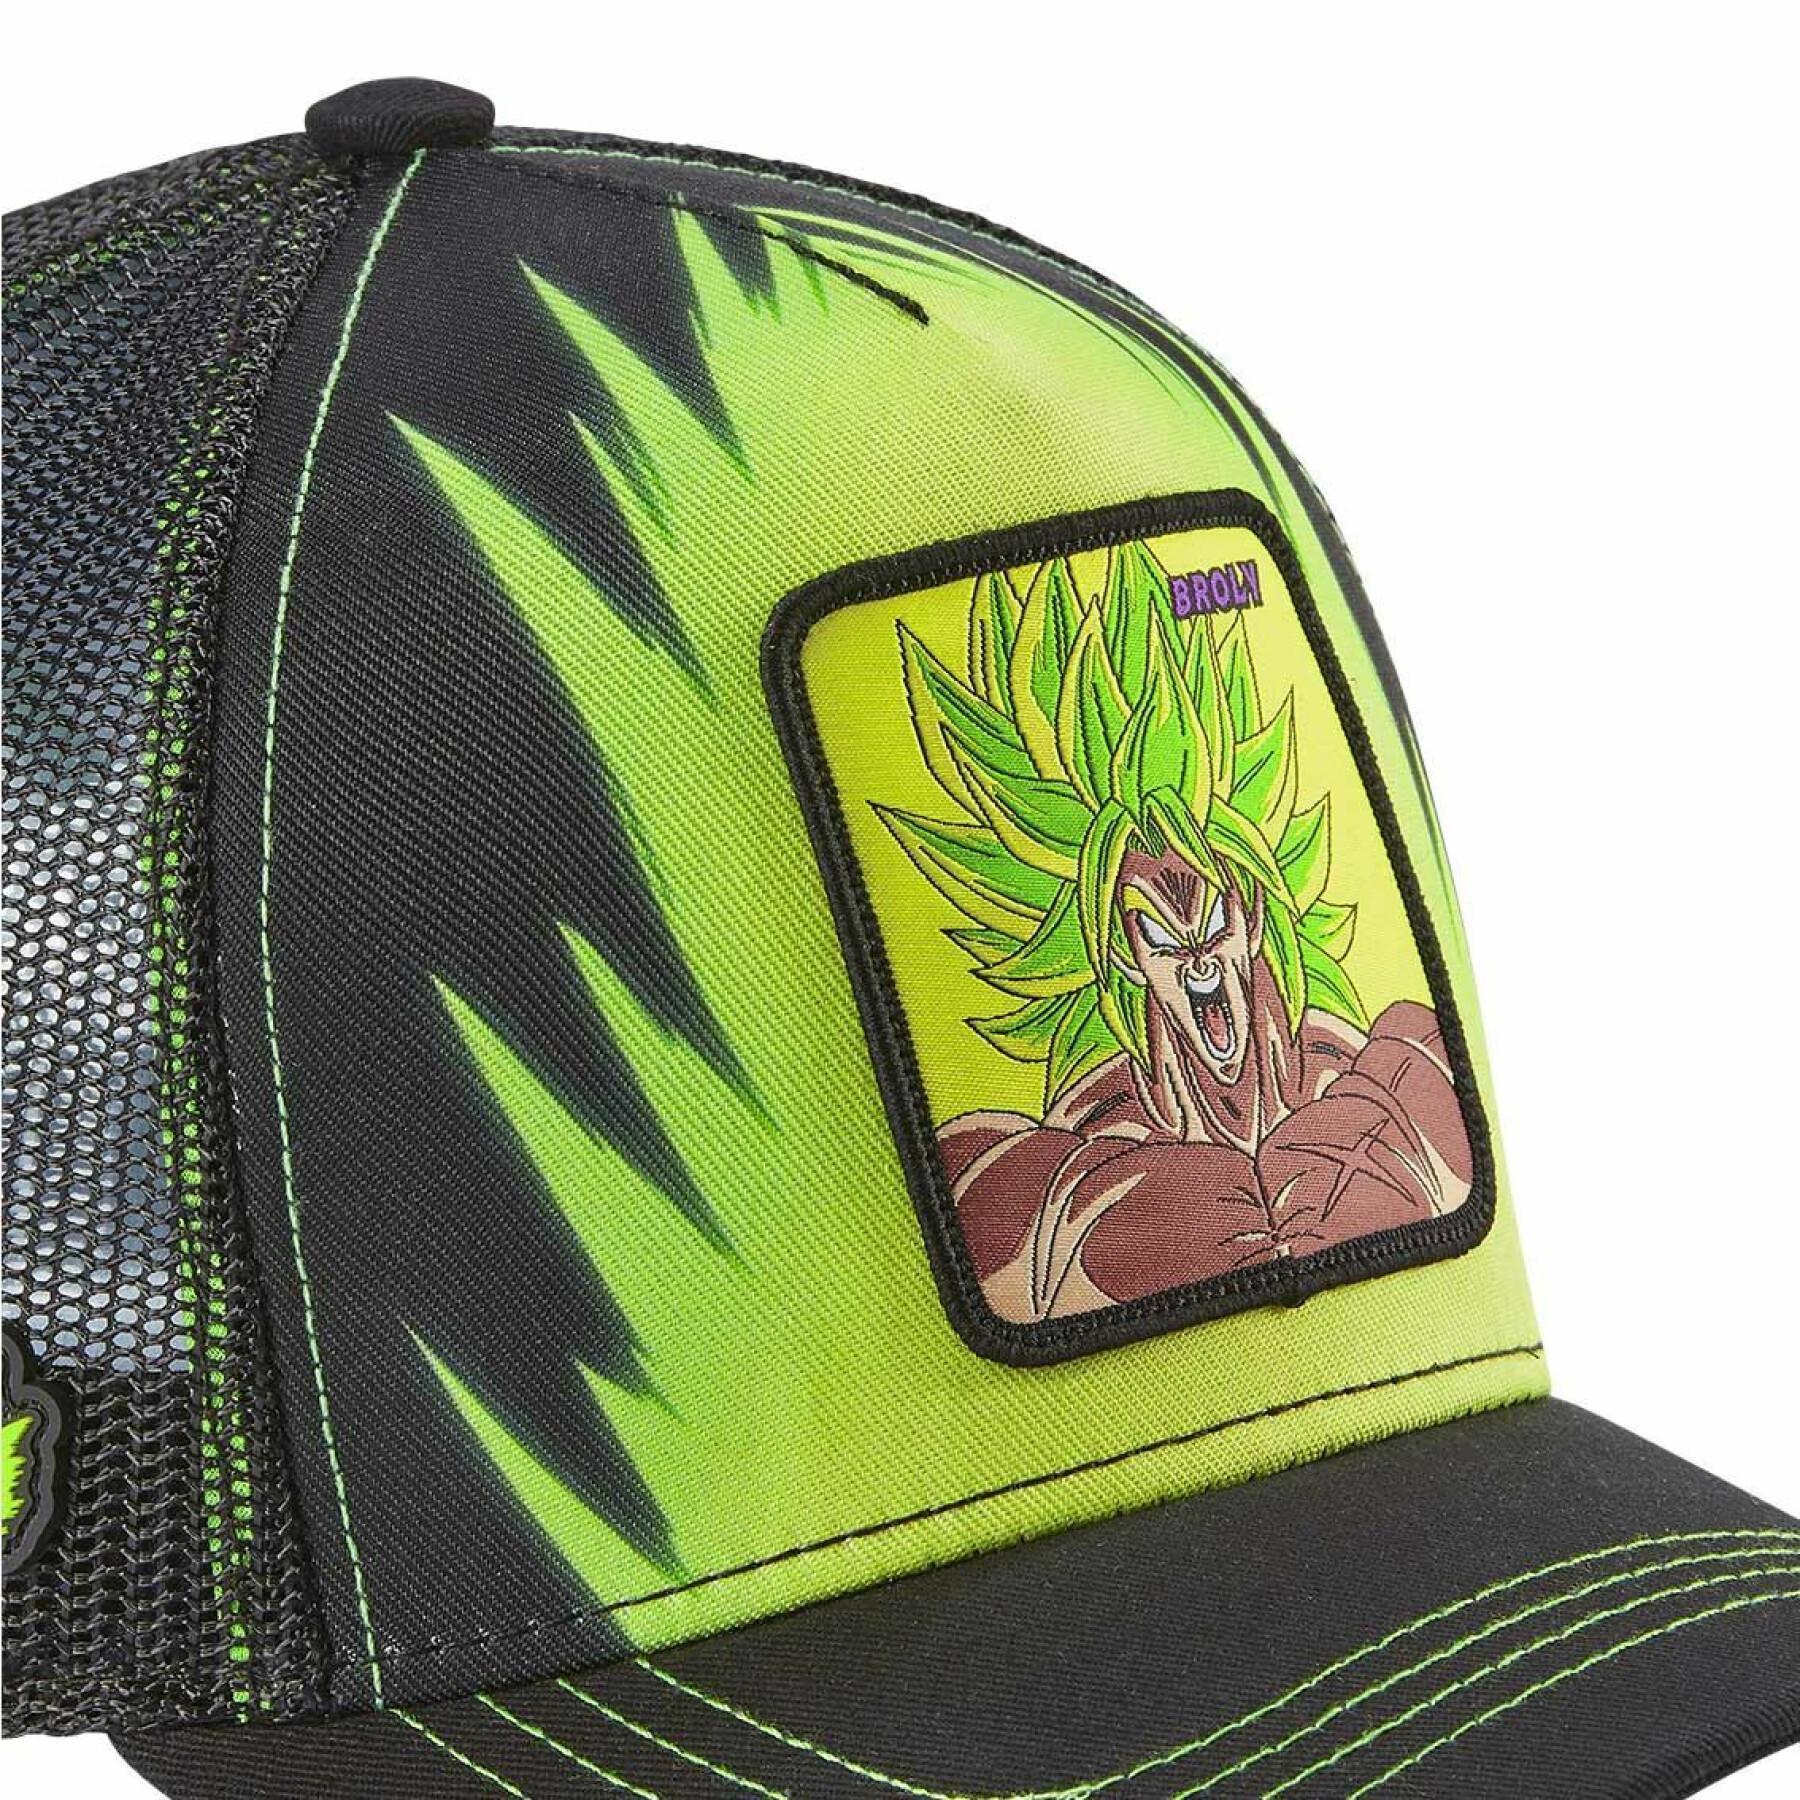 Casquette Capslab Dragon Ball Broly